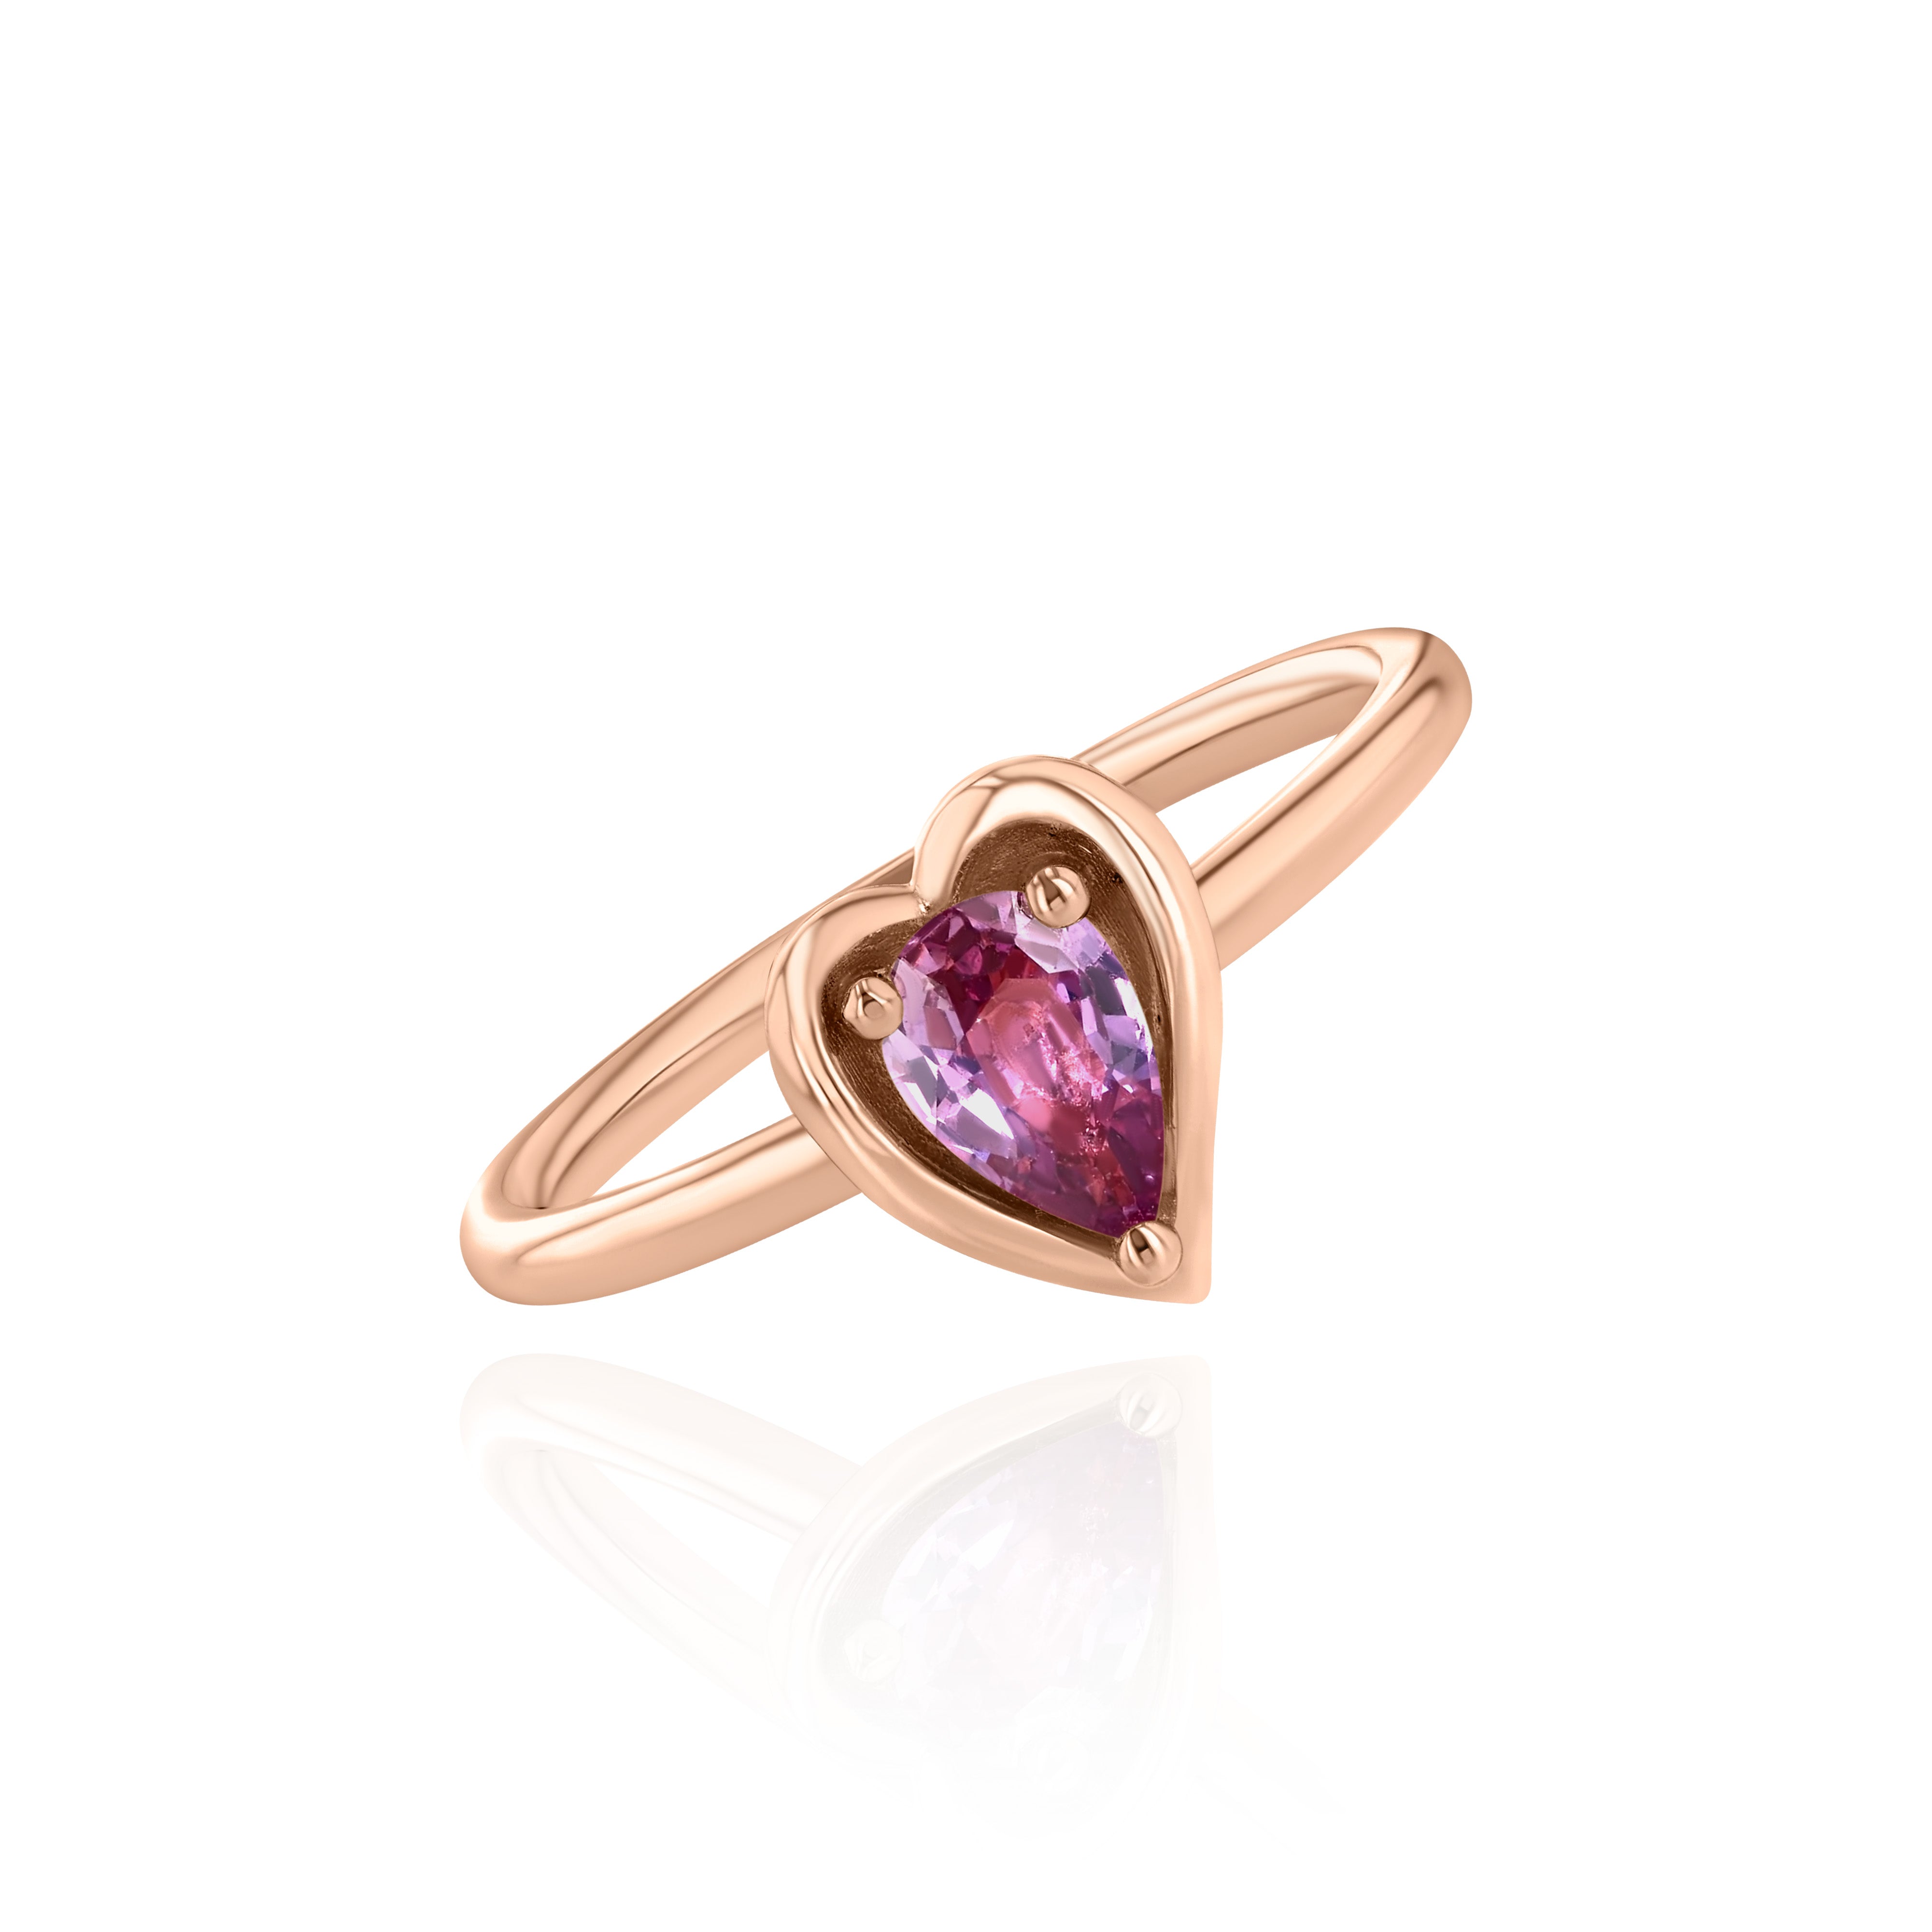 Rose Gold heart shaped ring with a pear shaped Pink Sapphire, Small